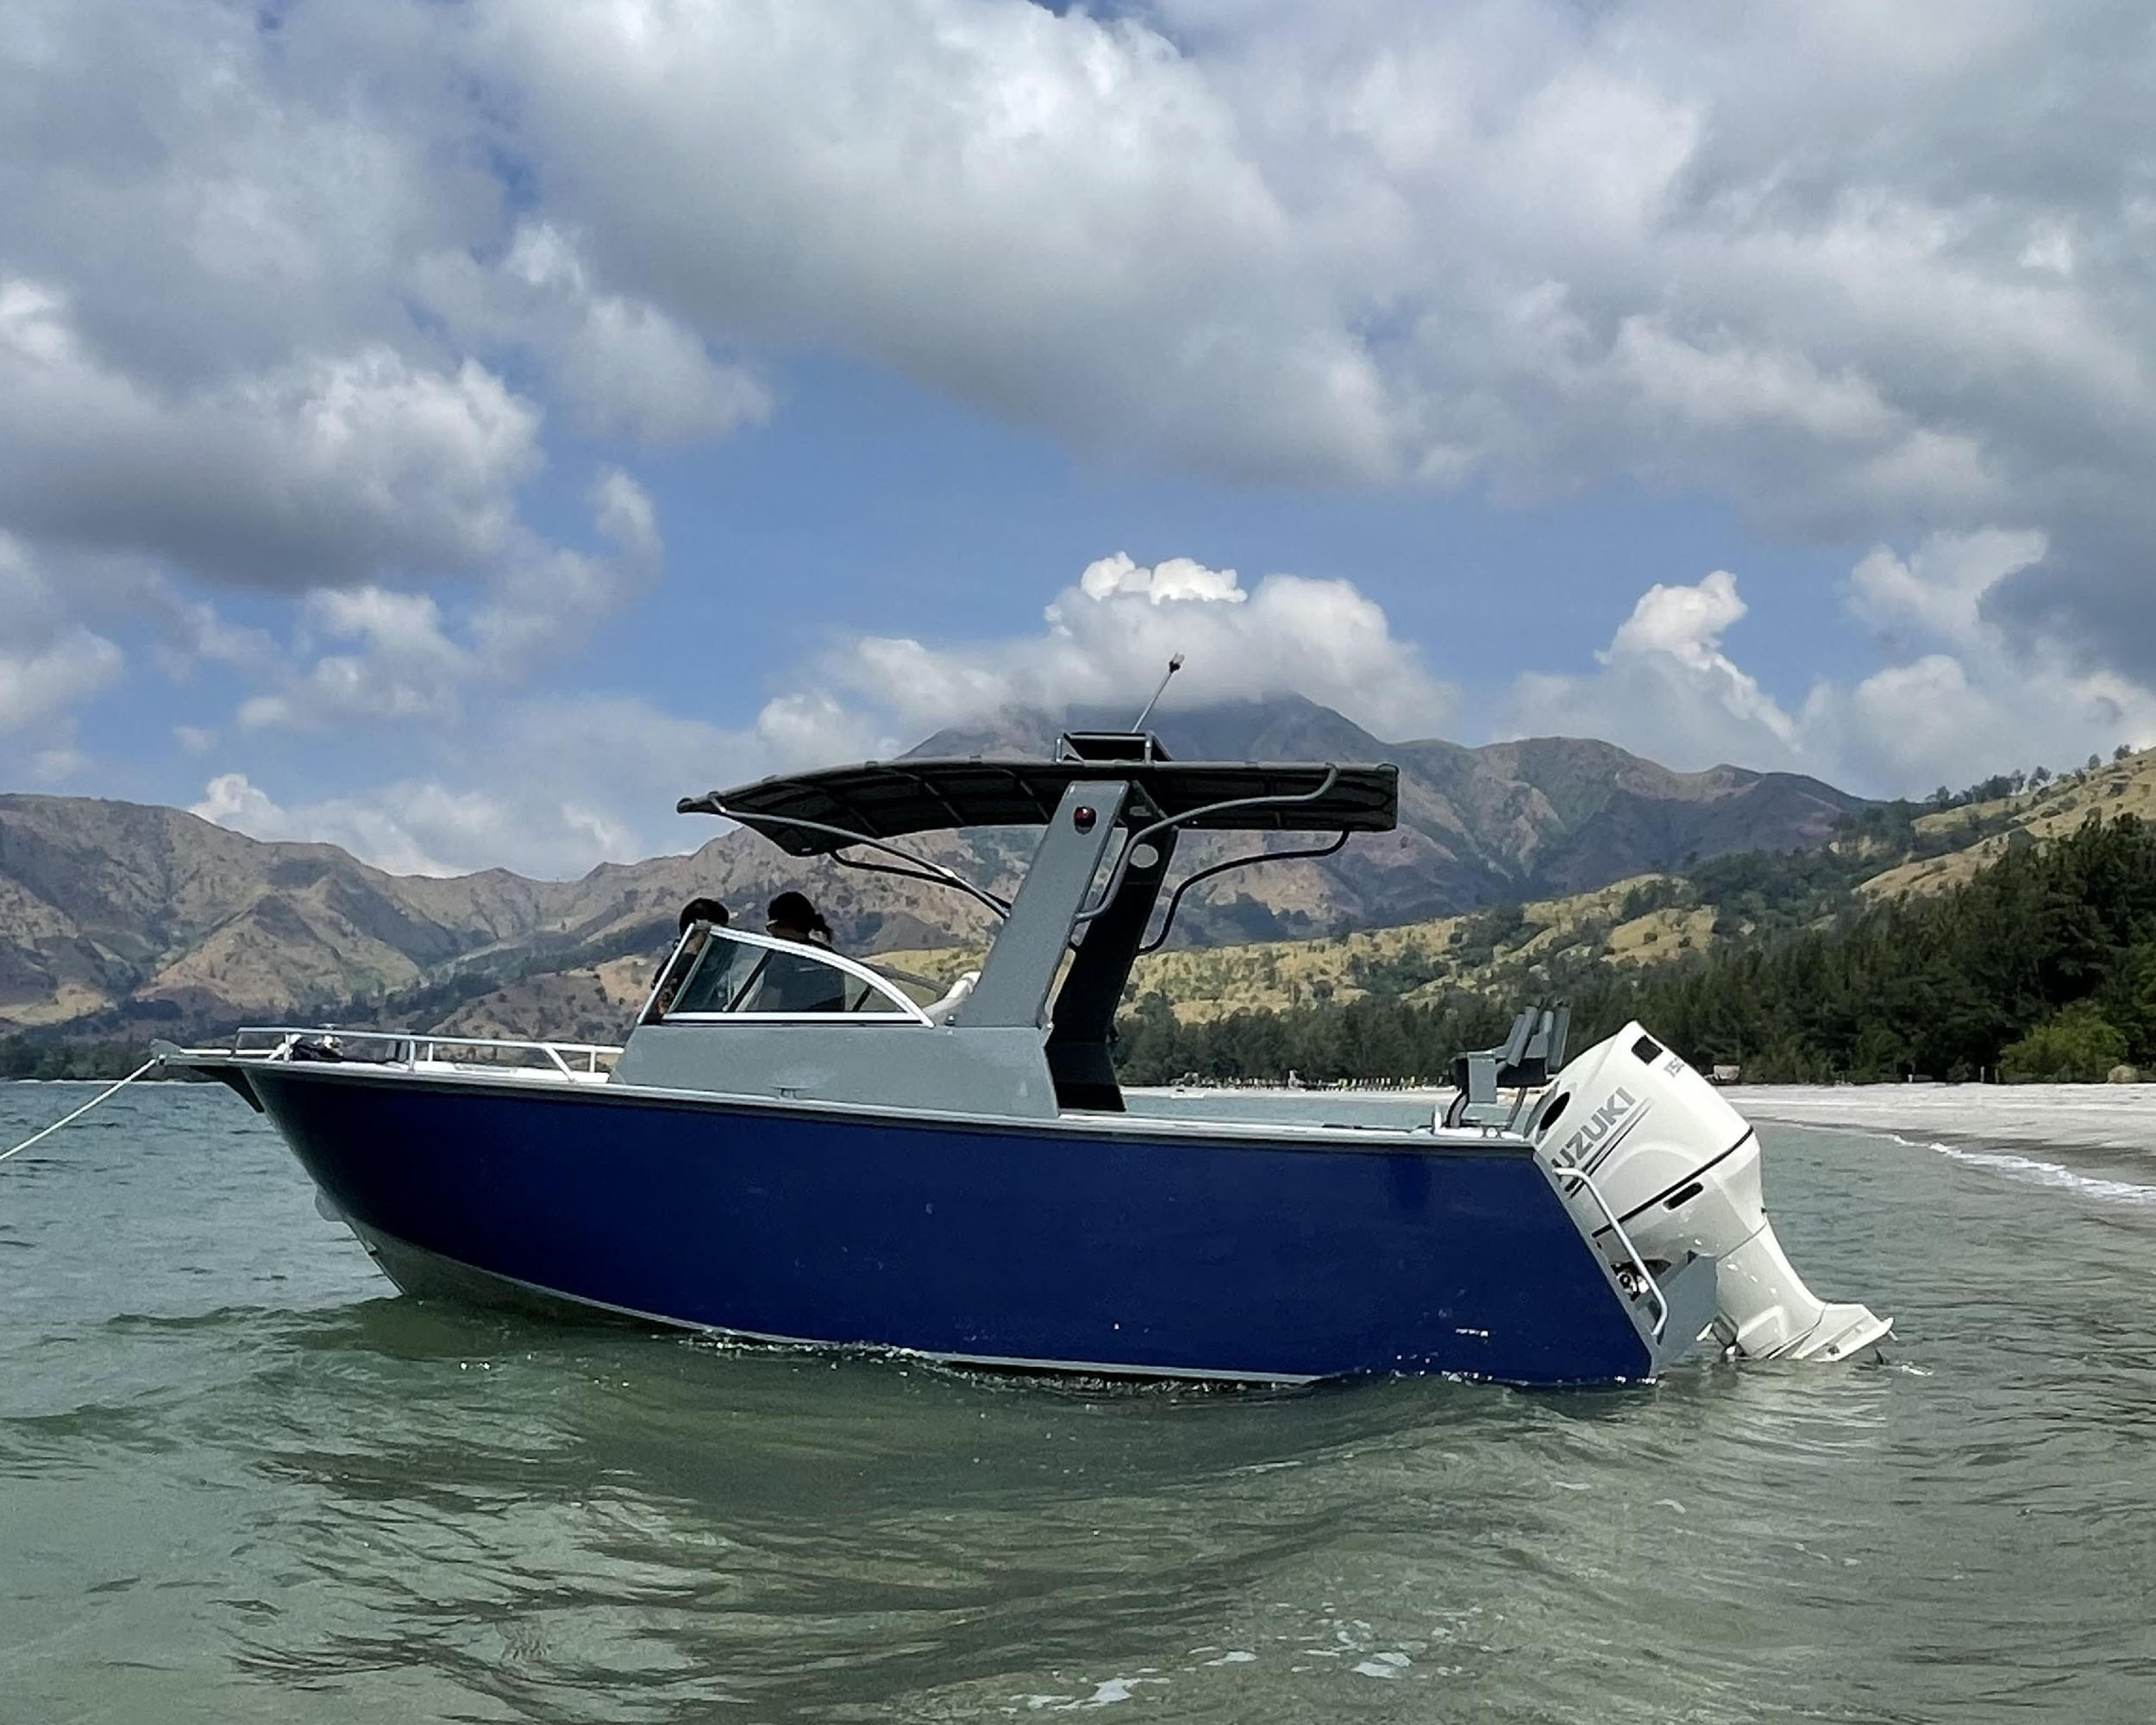 Boat for sale - Bay Marine Subic